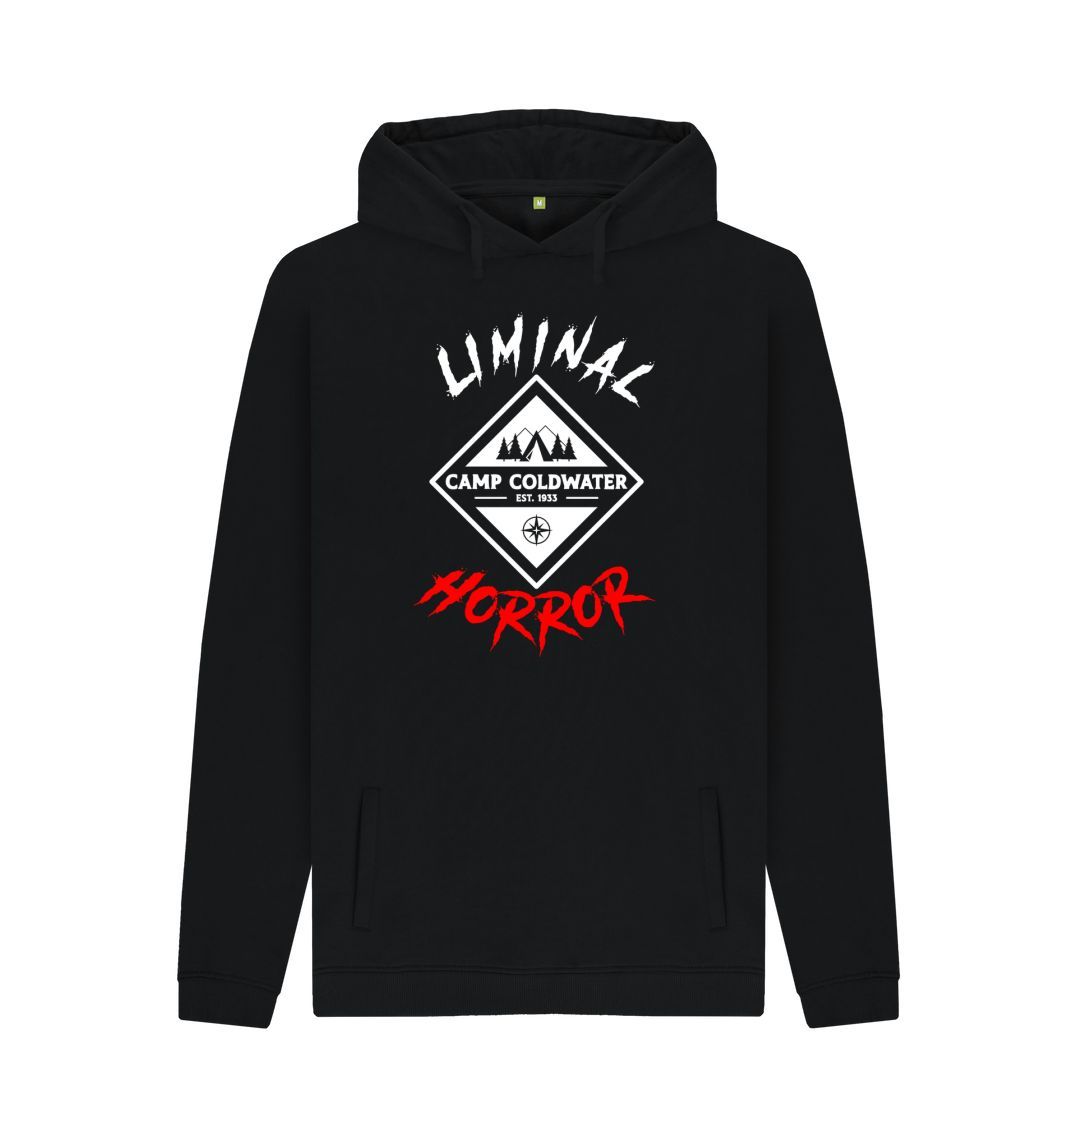 Black Camp Coldwater White and Red Logo on Black Hoodie